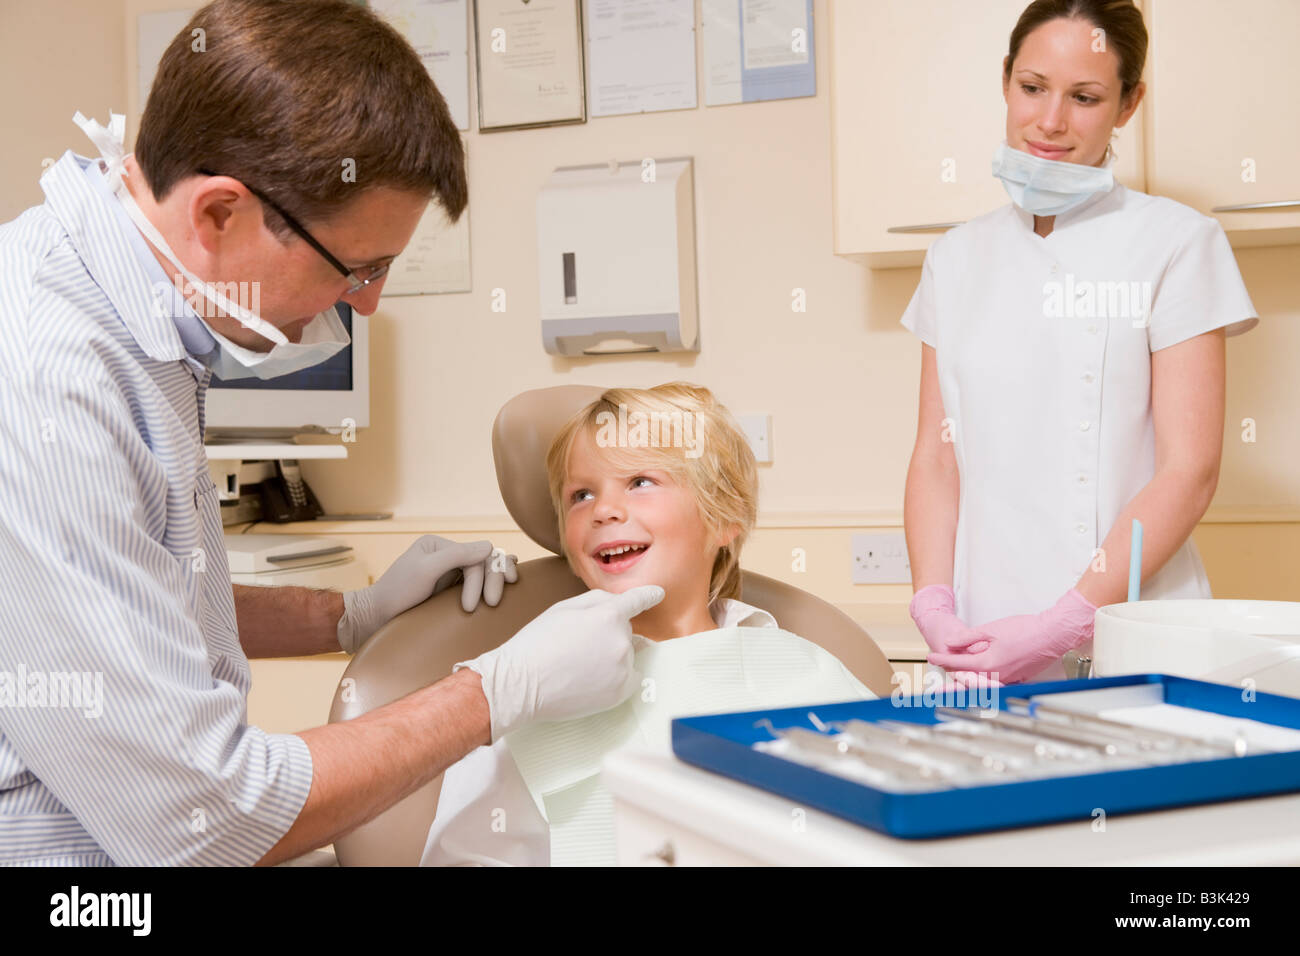 Dentist and assistant in exam room with young boy in chair Stock Photo